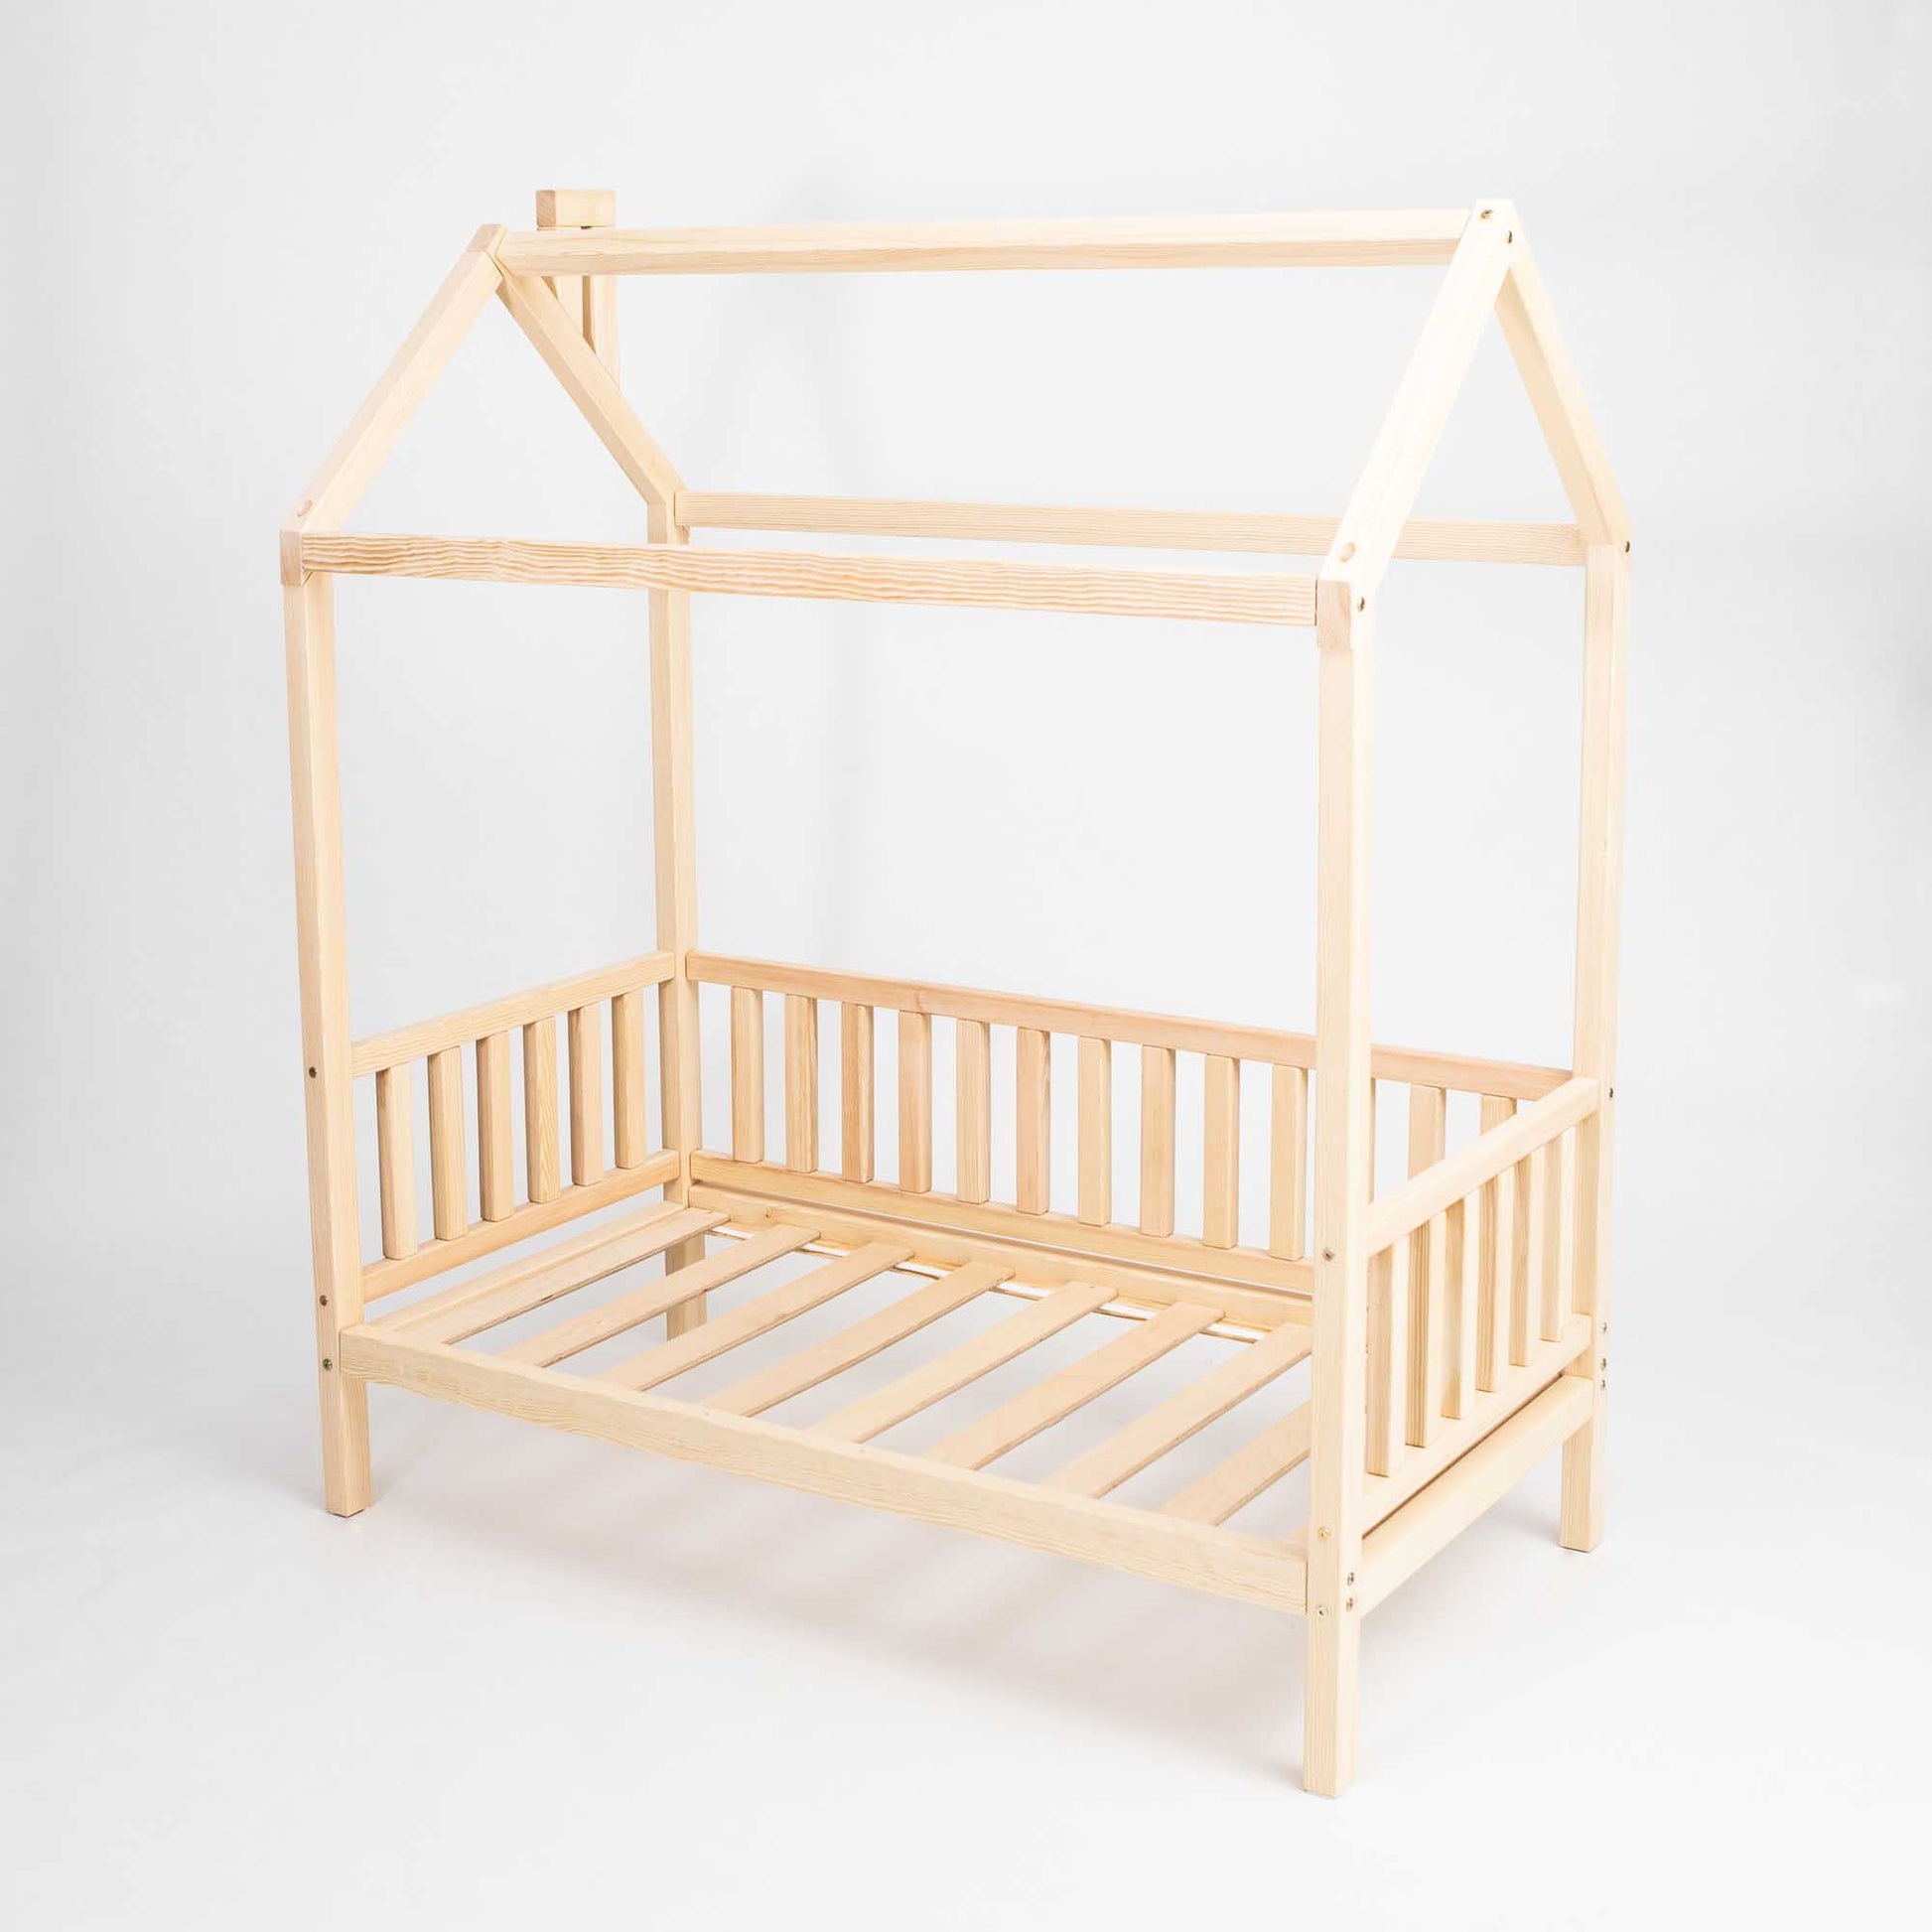 A Raised house bed on legs with 3-sided rails with a slatted roof.